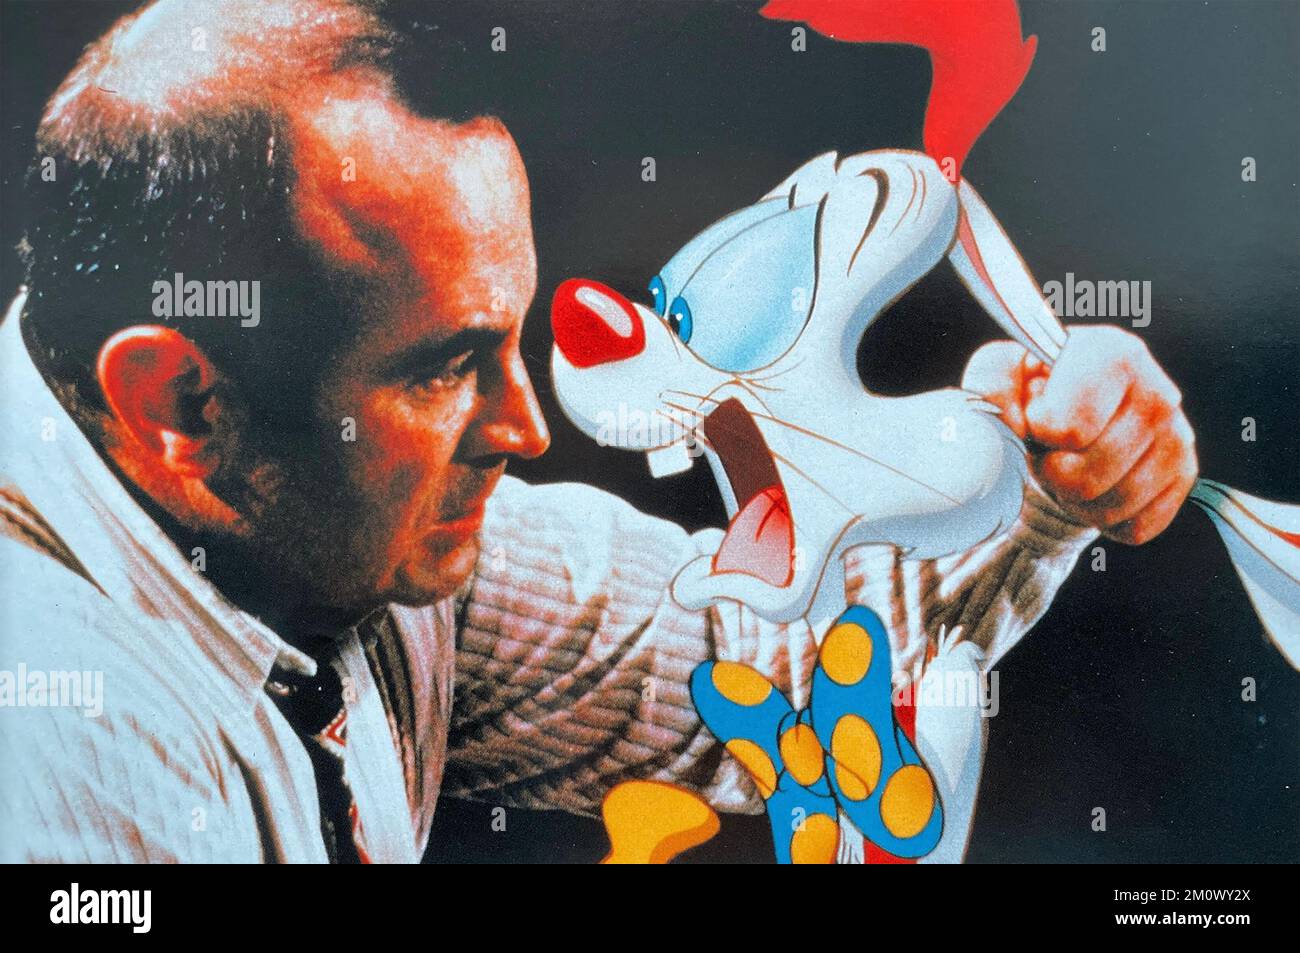 WHO FRAMED ROGER RABBIT 1988 Buena Vista Pictures film with Bob Hoskins. Stock Photo